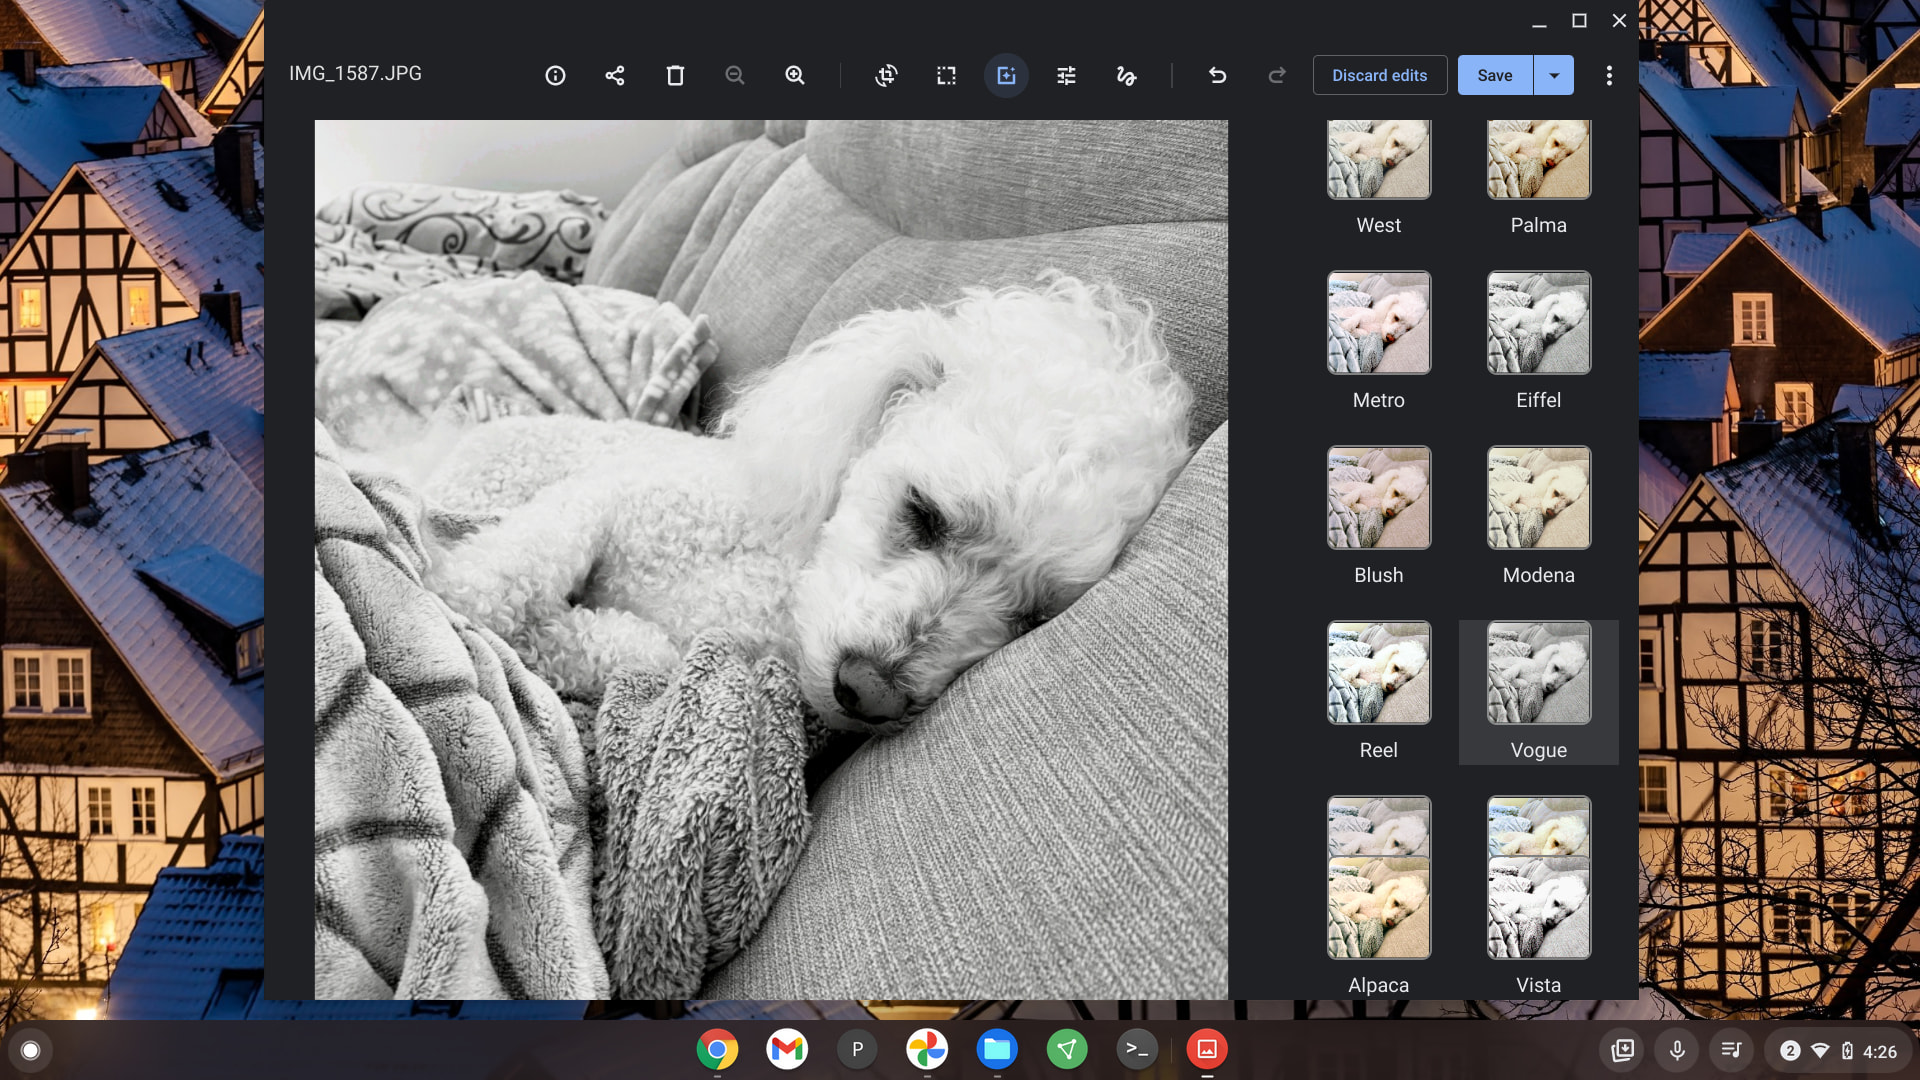 Chrome OS 89 adds media annotations, photo filters and a working Trash can for Chromebooks